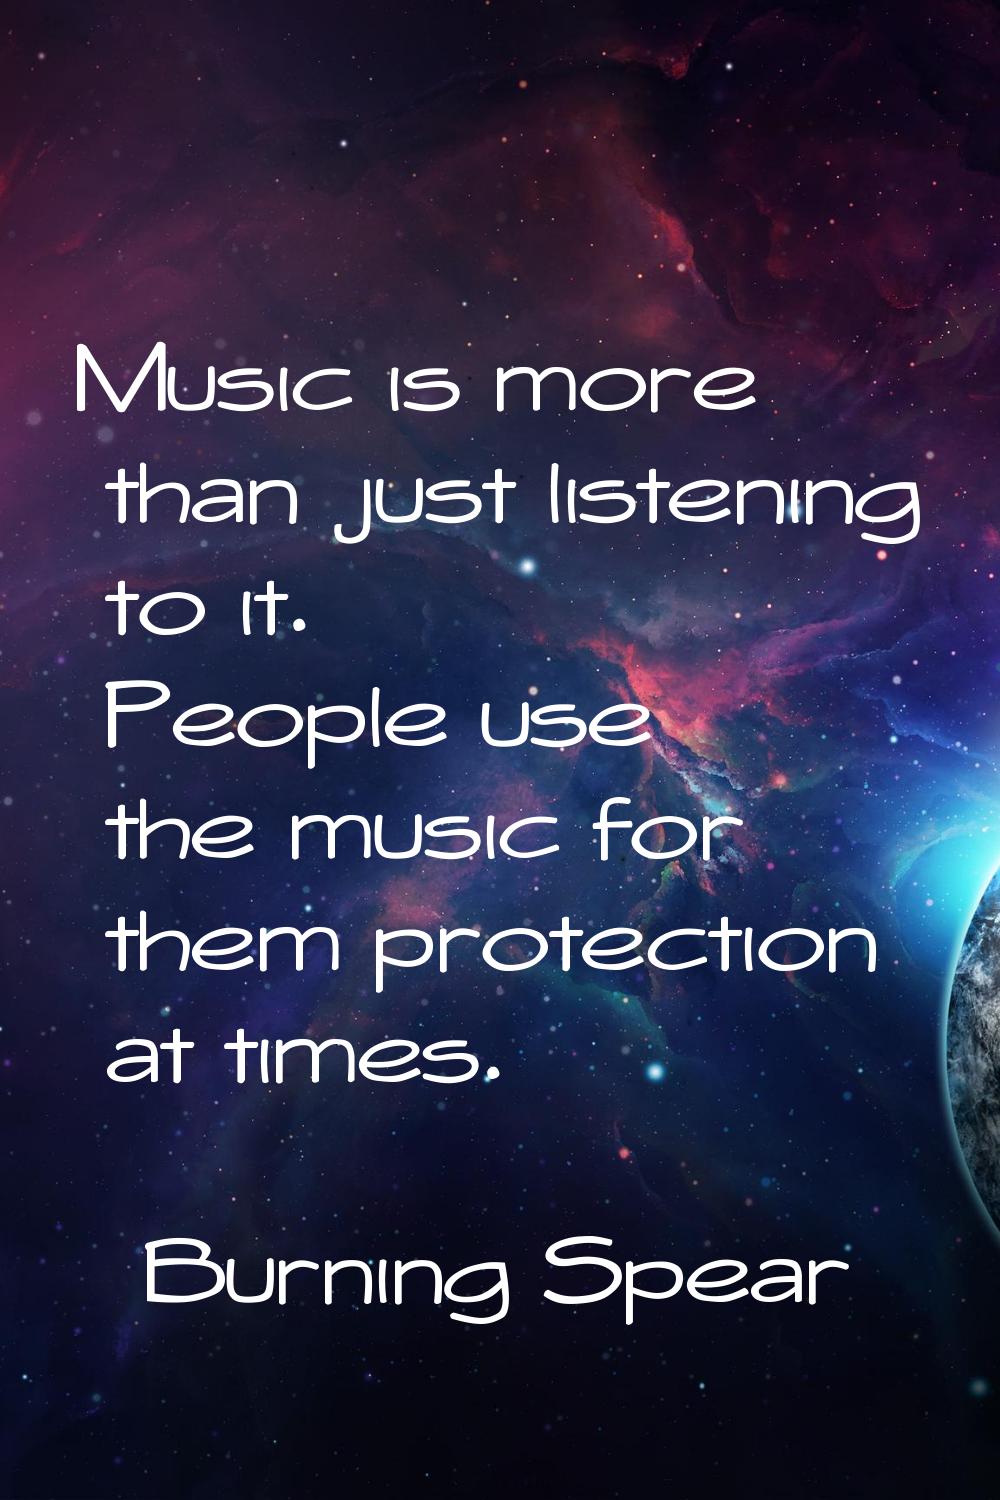 Music is more than just listening to it. People use the music for them protection at times.